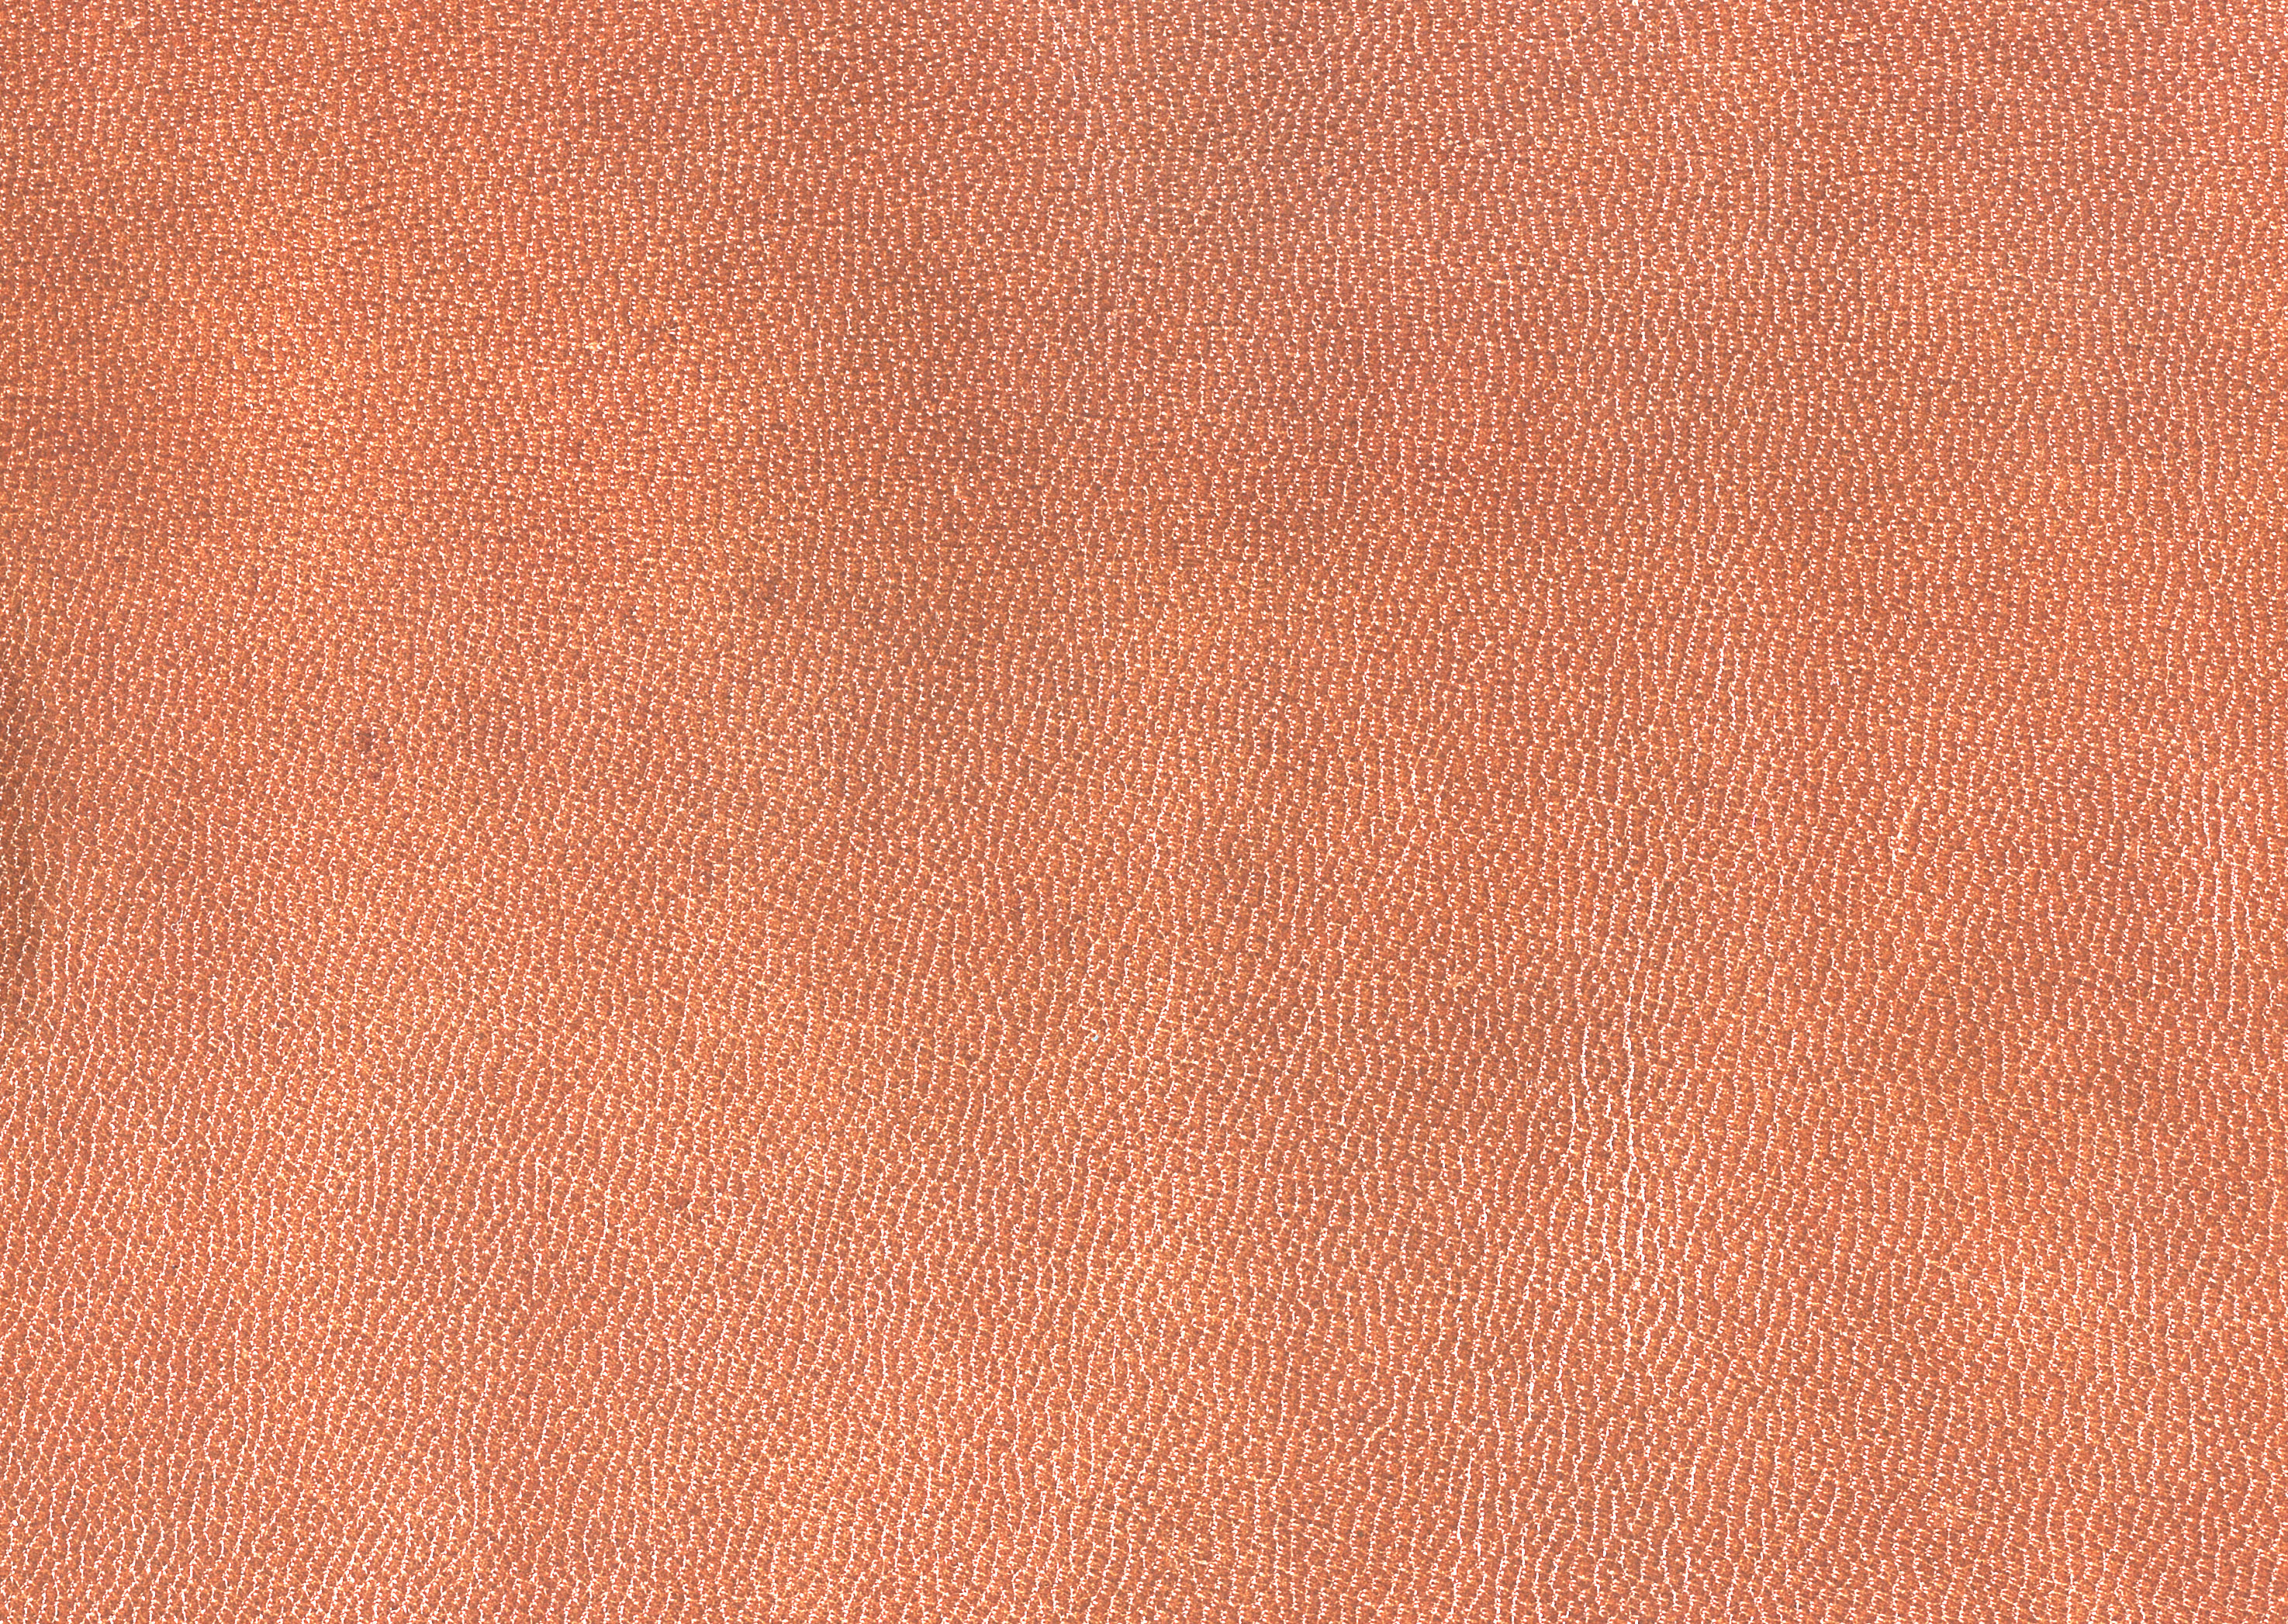 Beige leather texture background image free download